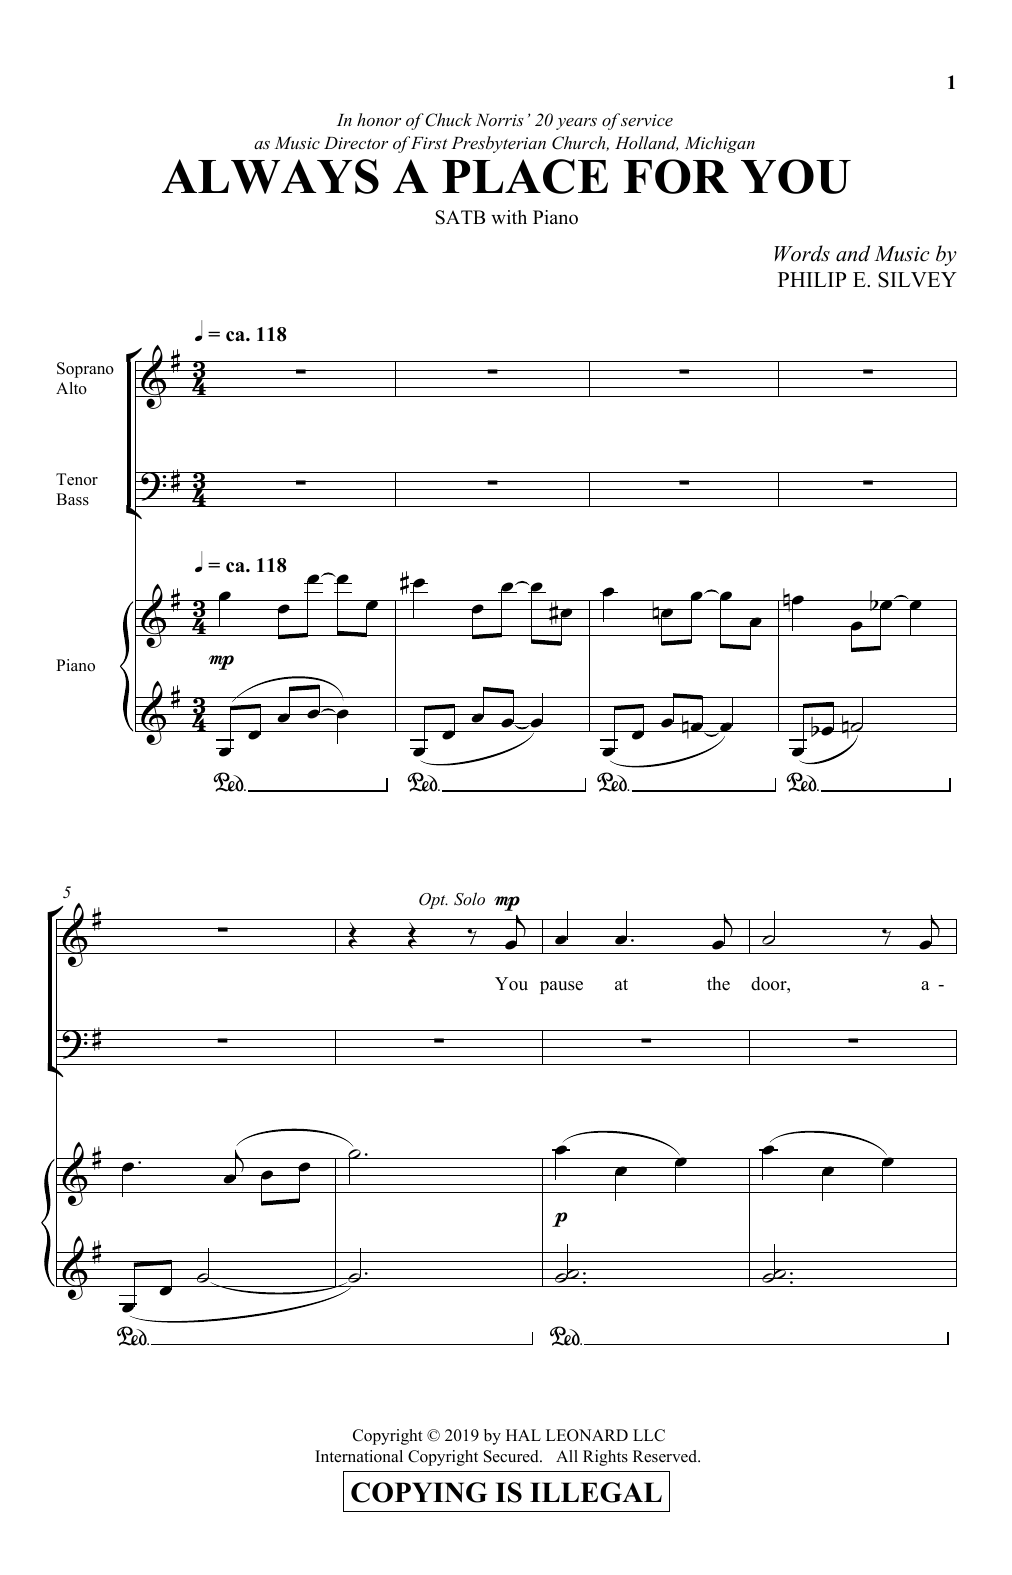 Download Philip Silvey Always A Place For You Sheet Music